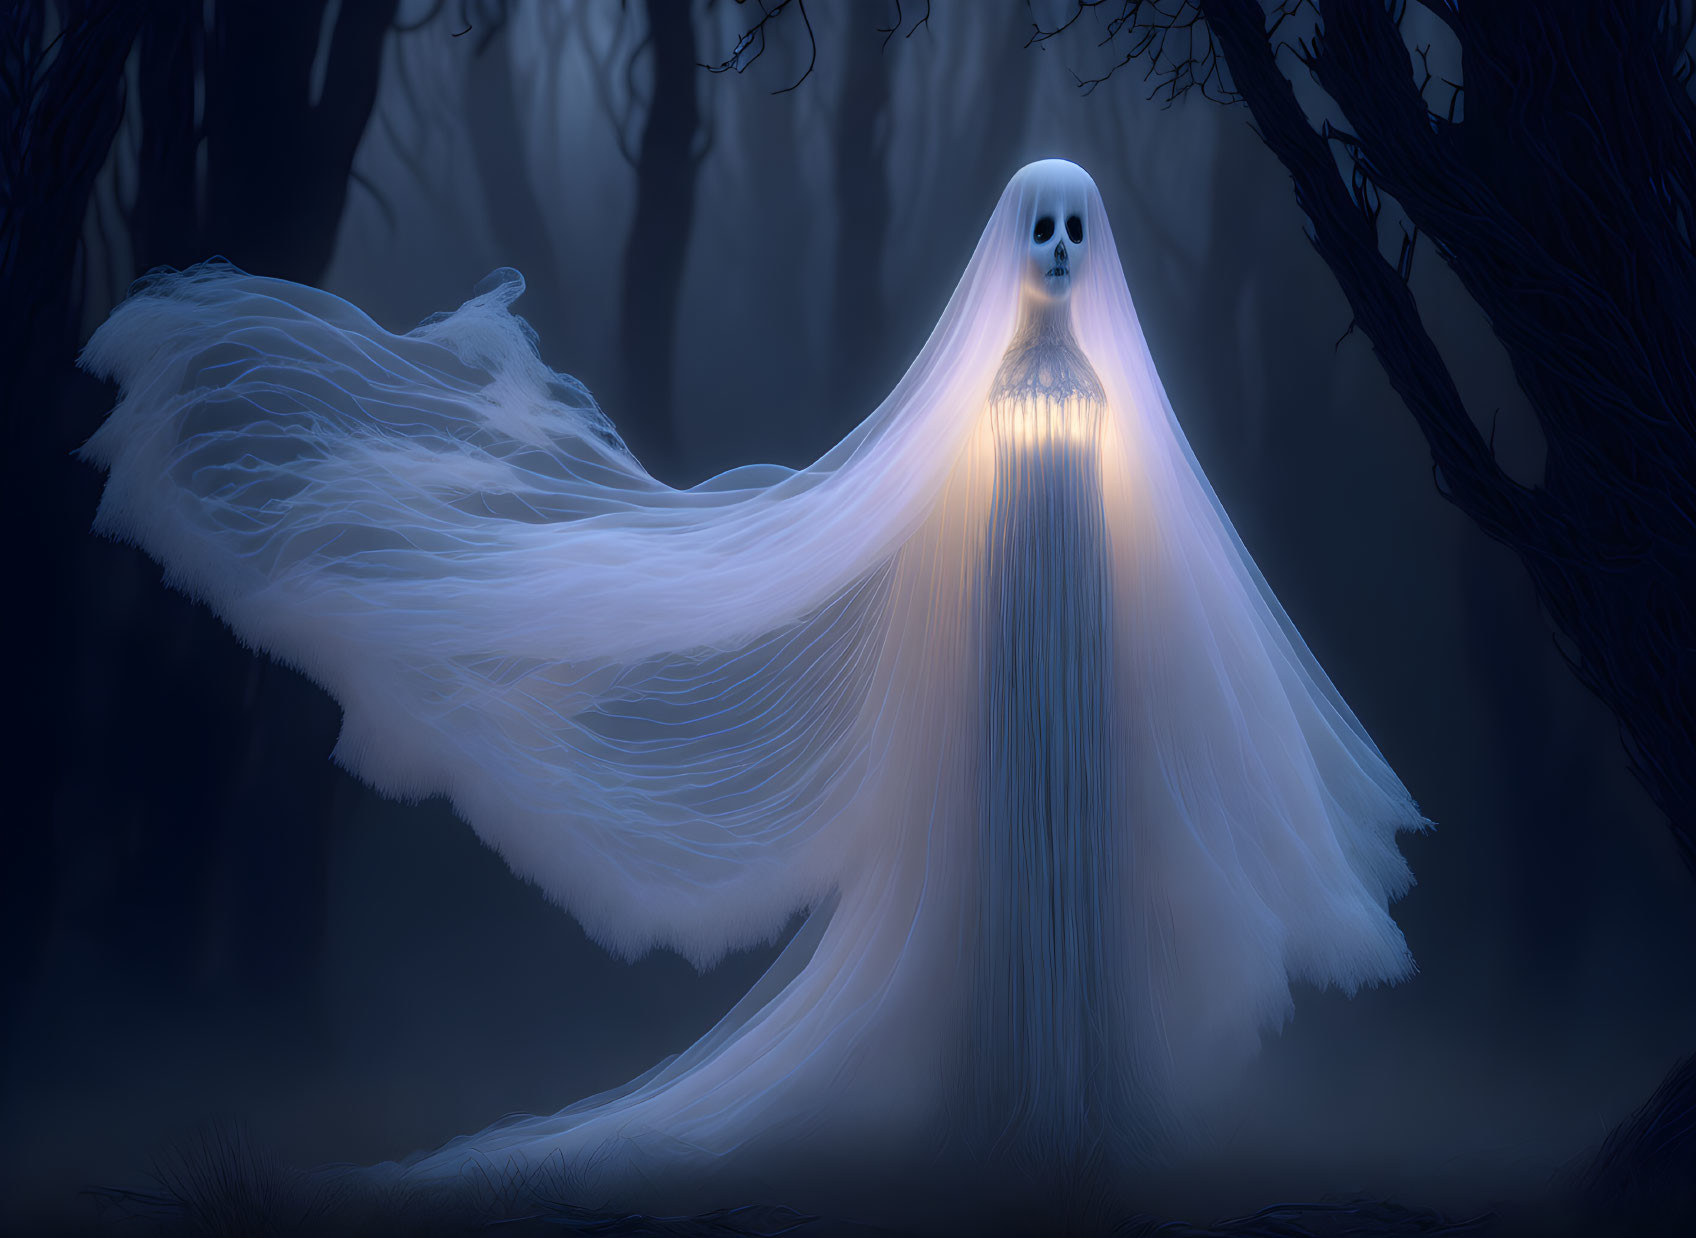 Ethereal figure with flowing cape in misty twilight forest